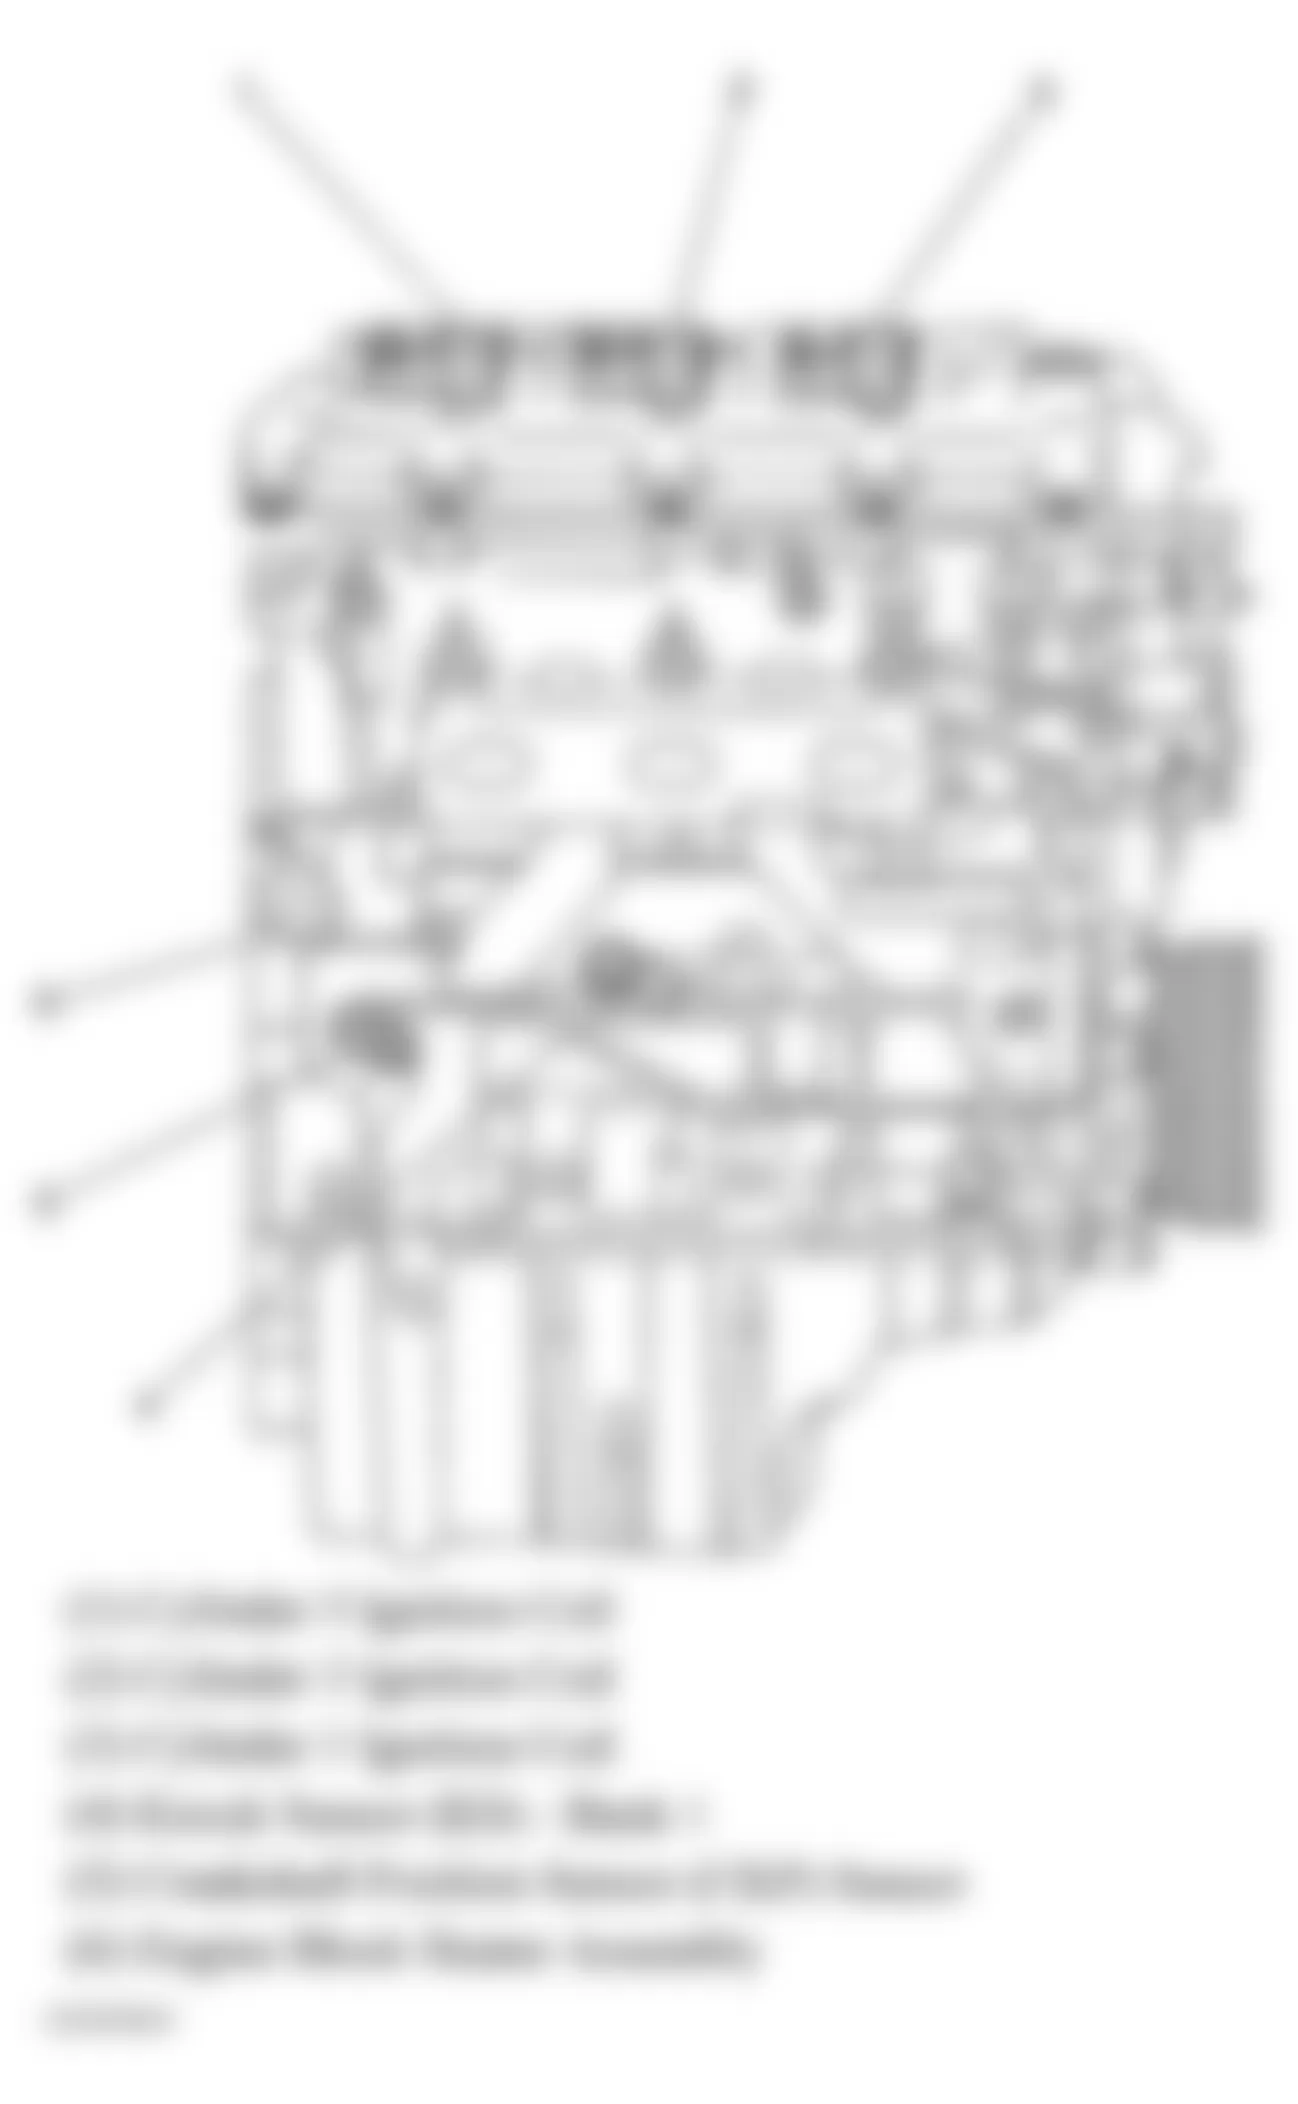 Buick Rendezvous CX 2006 - Component Locations -  Left Side Of Engine (3.6L)